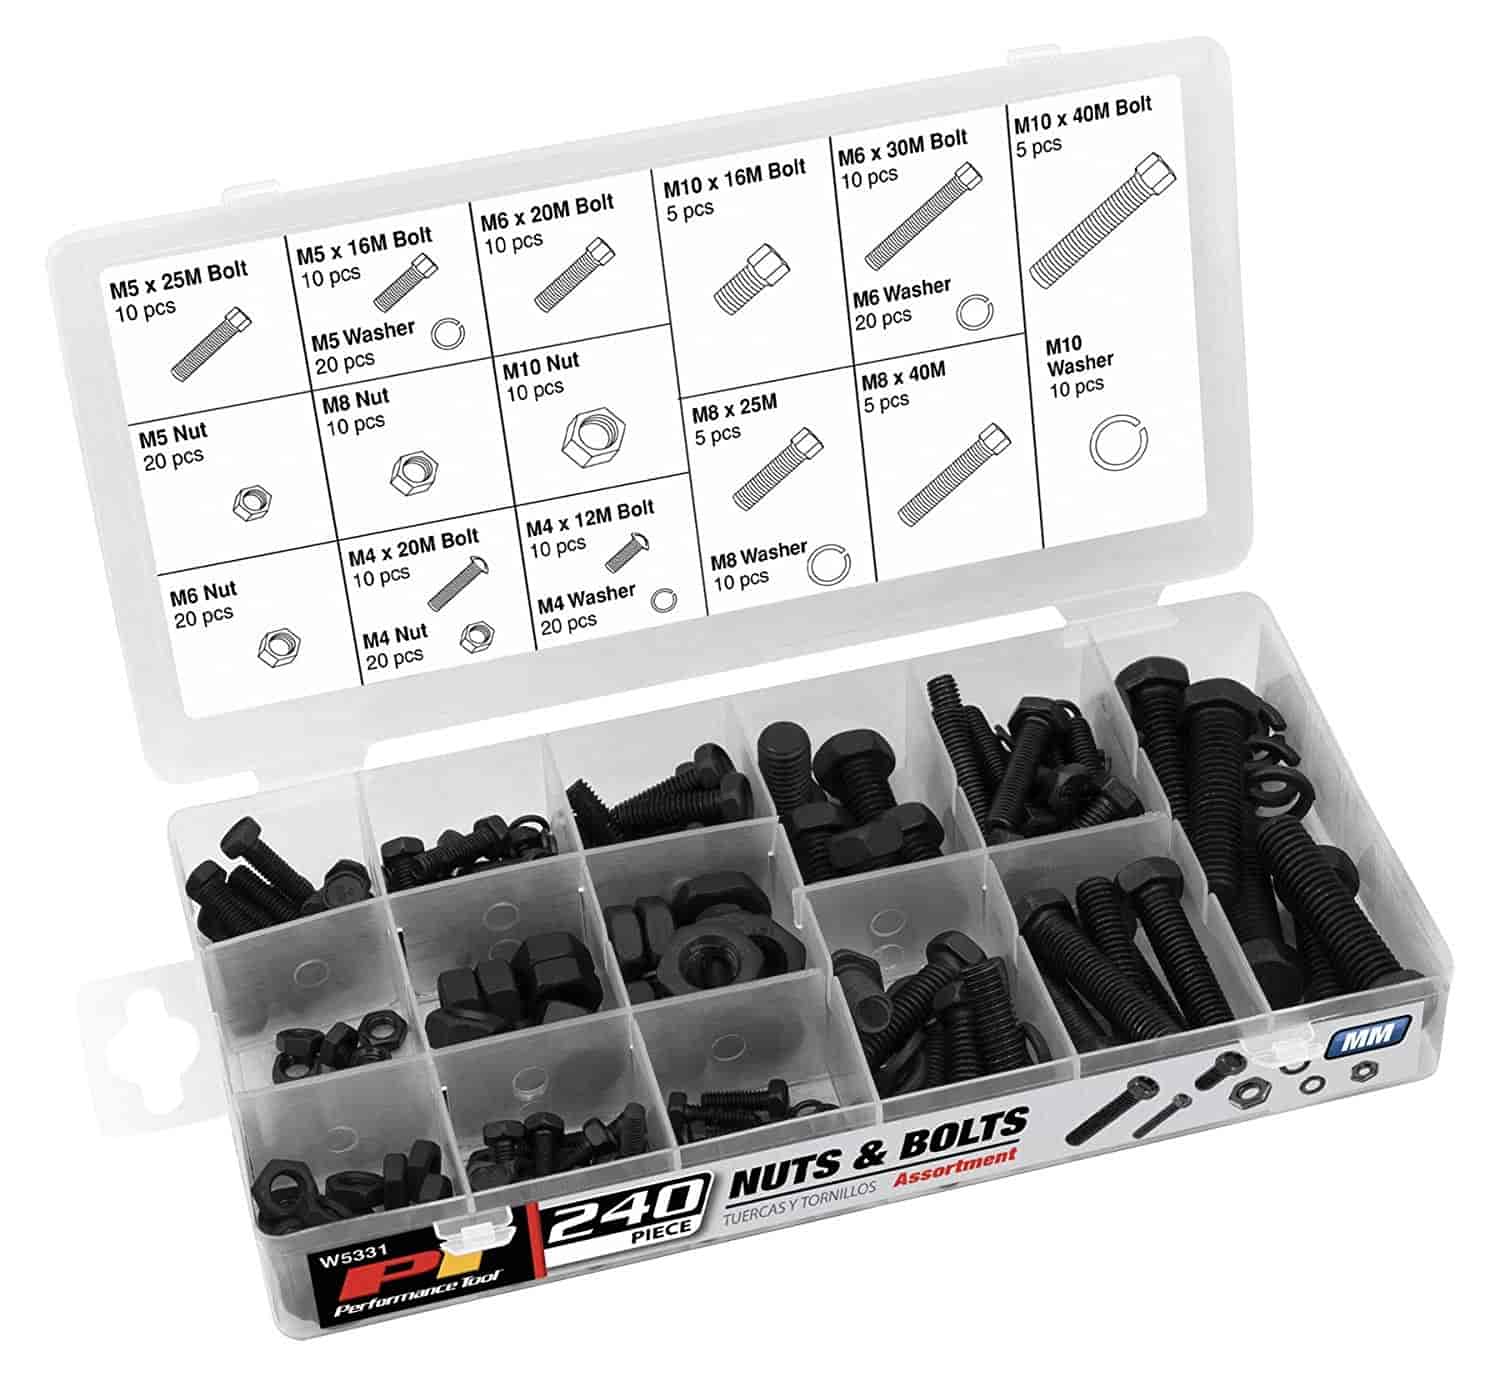 240-piece Nuts and Bolts Assortment